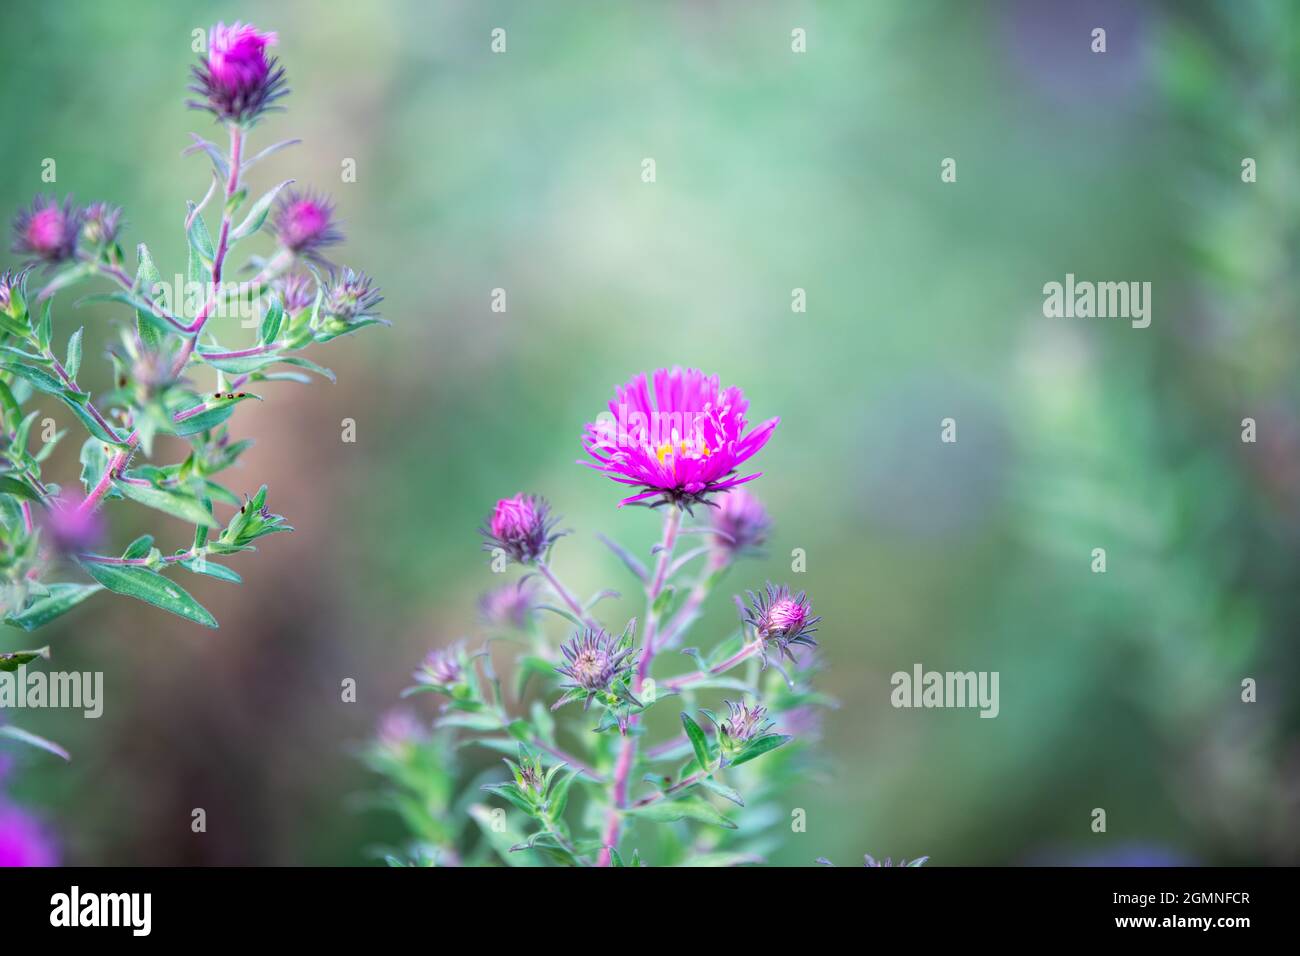 Purple and yellow aster flowers with a green background Stock Photo